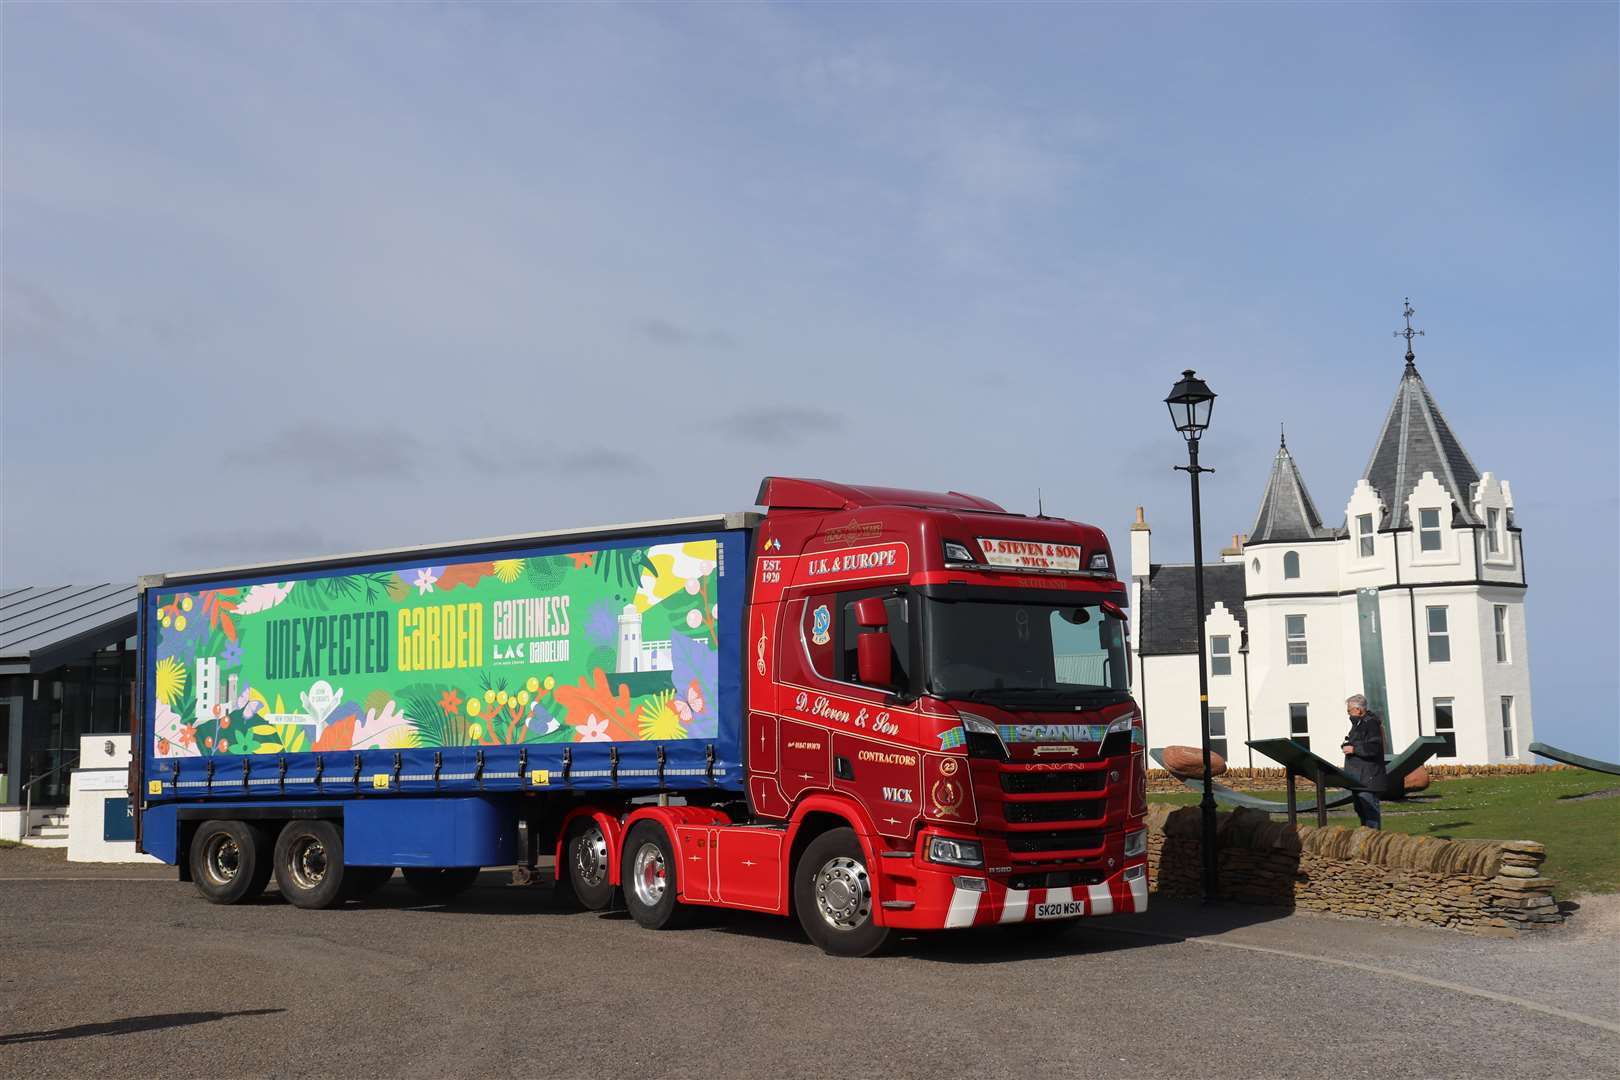 The Unexpected Garden project will take to the roads of Caithness in an ex-Tesco lorry, courtesy of D Stevens & Son.